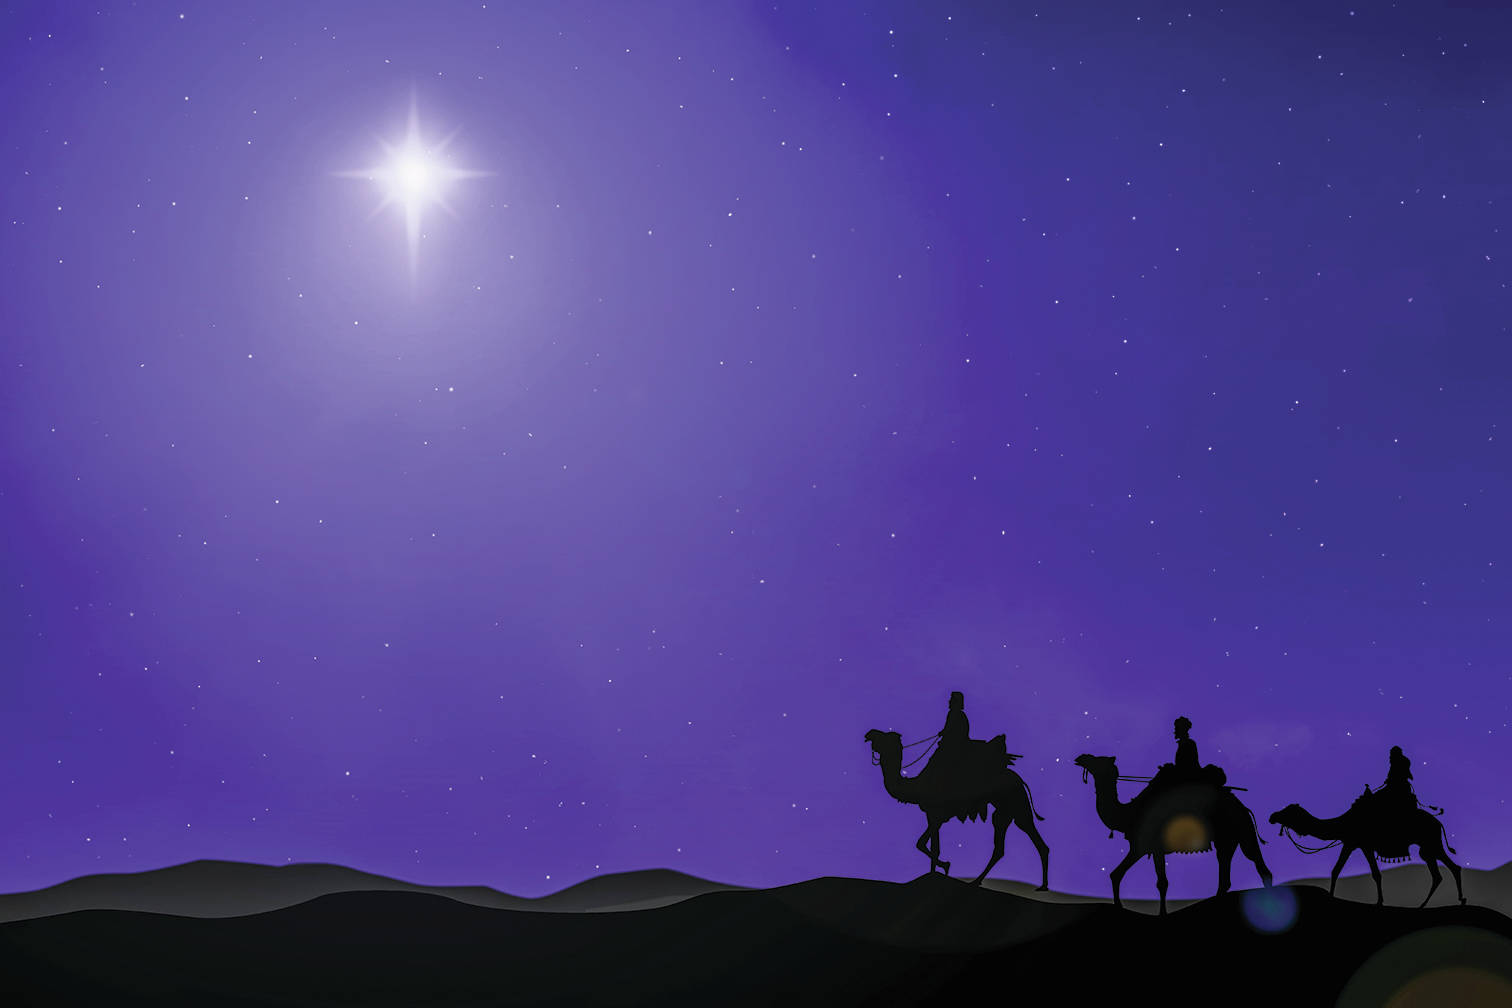 Minister’s Message: Remembering the greatest gift of all on Christmas